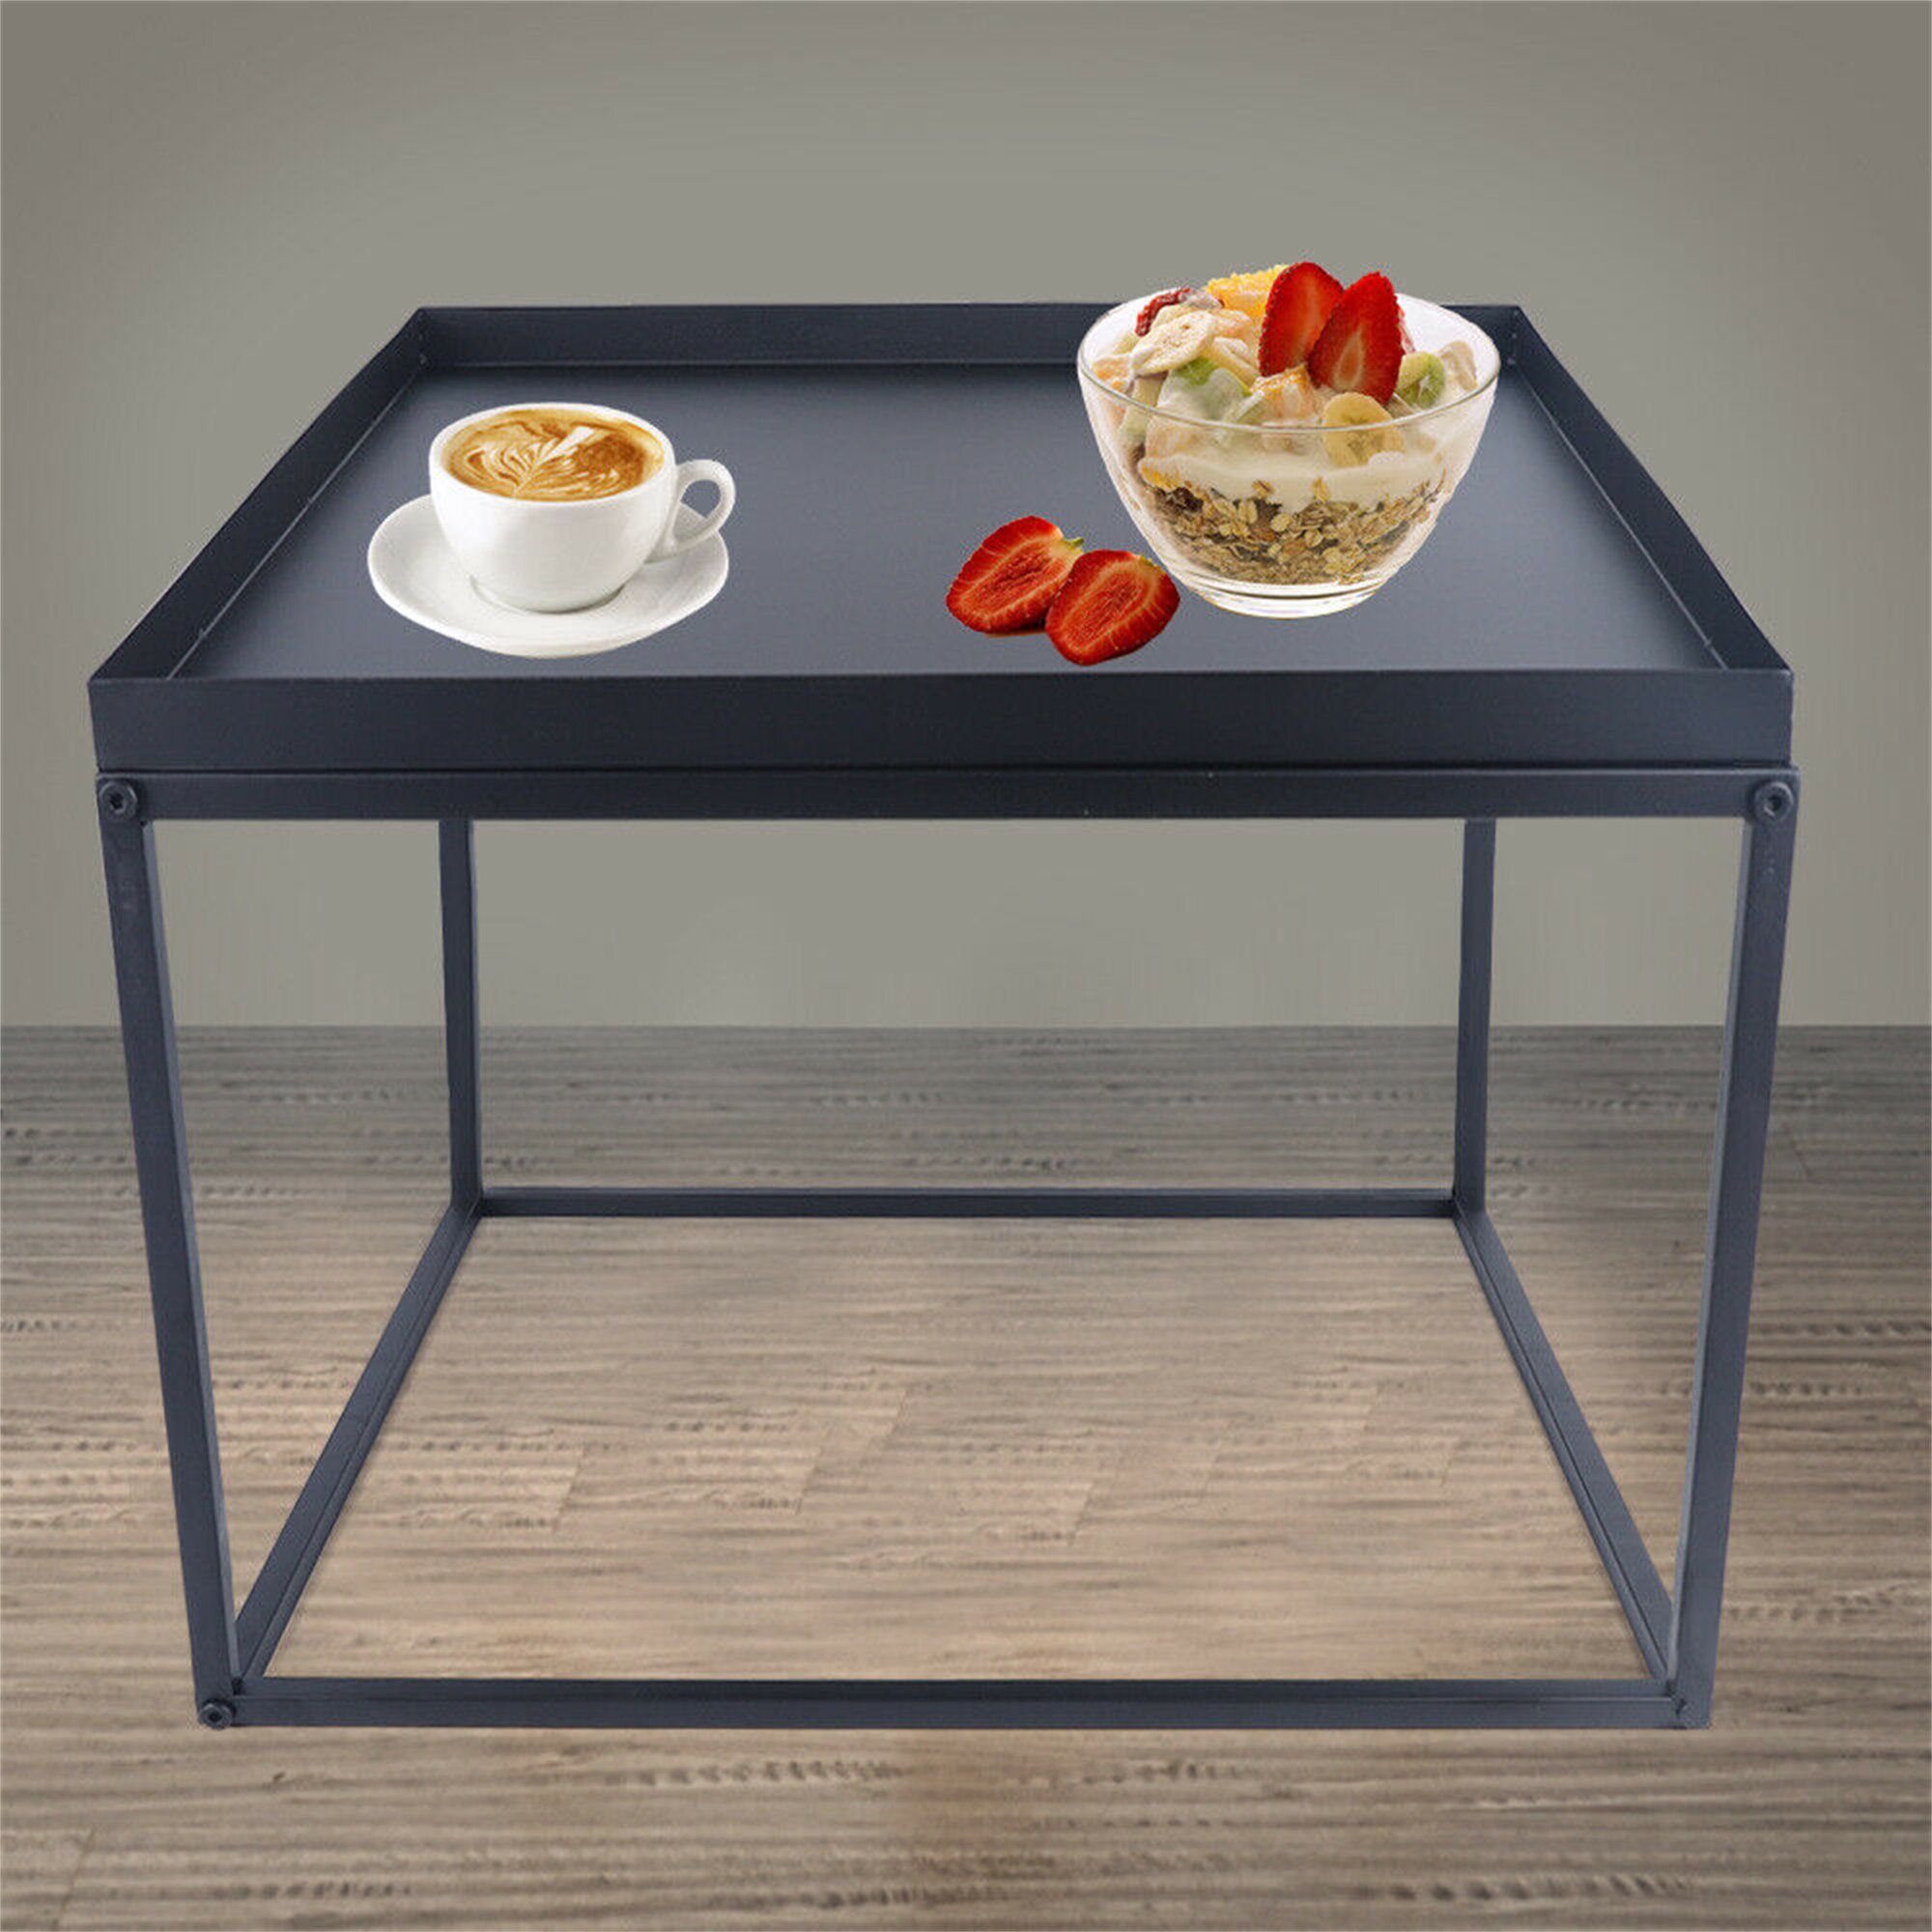 17 Stories Modern Matte Metal Square Tray Coffee Table Side Table (black) |  Wayfair Intended For Matte Coffee Tables (View 16 of 20)